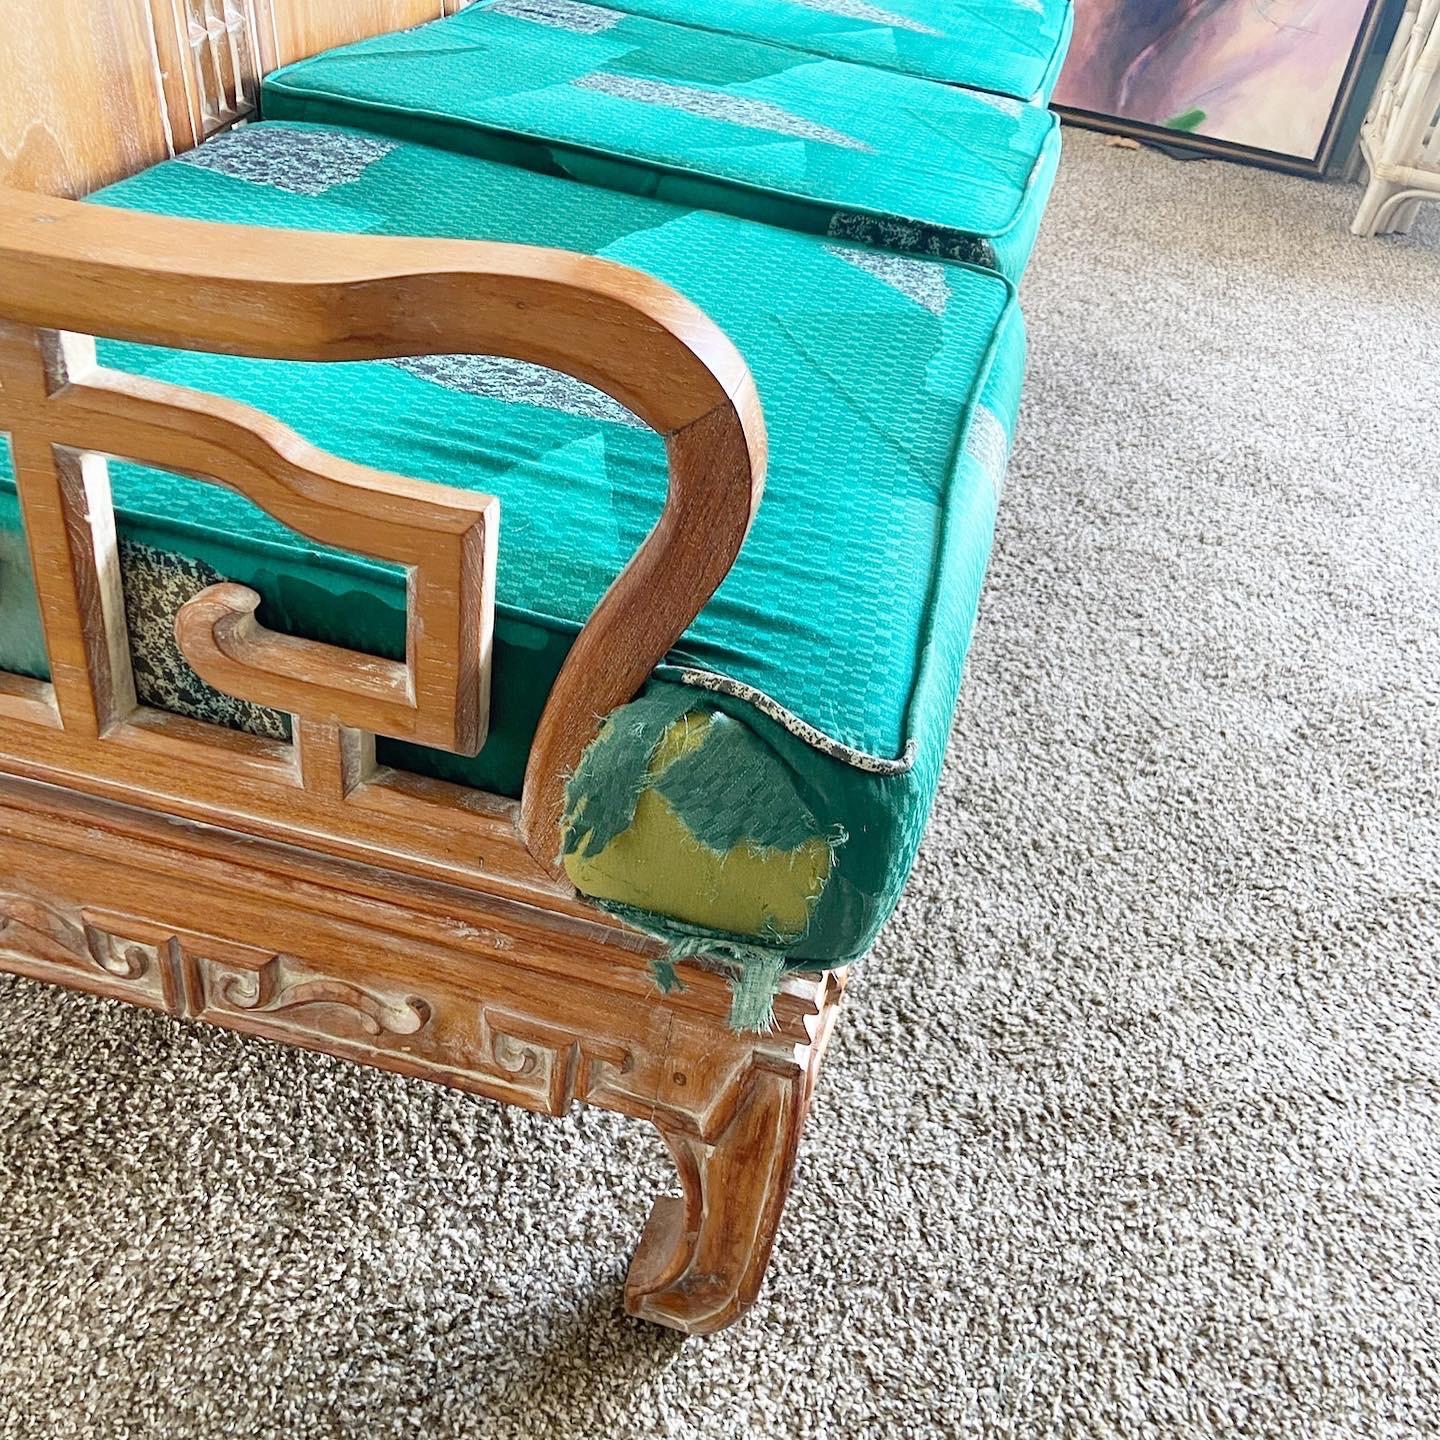 Ming Style Carved Wooden Sofa/Bench With Arm Chair In Good Condition For Sale In Delray Beach, FL